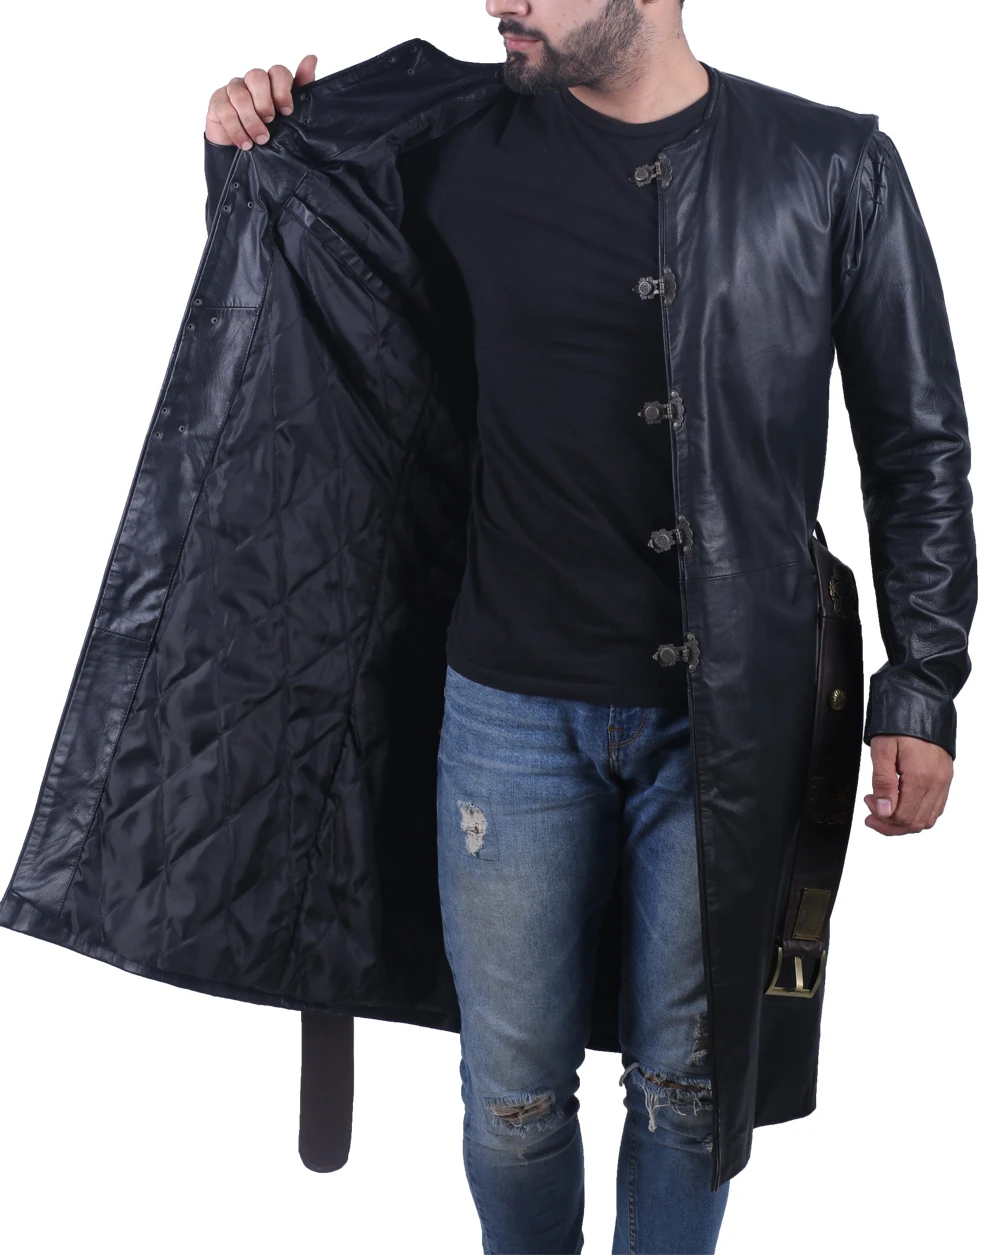 Game Of Thrones Jaime Lannister Leather Coat Jacket